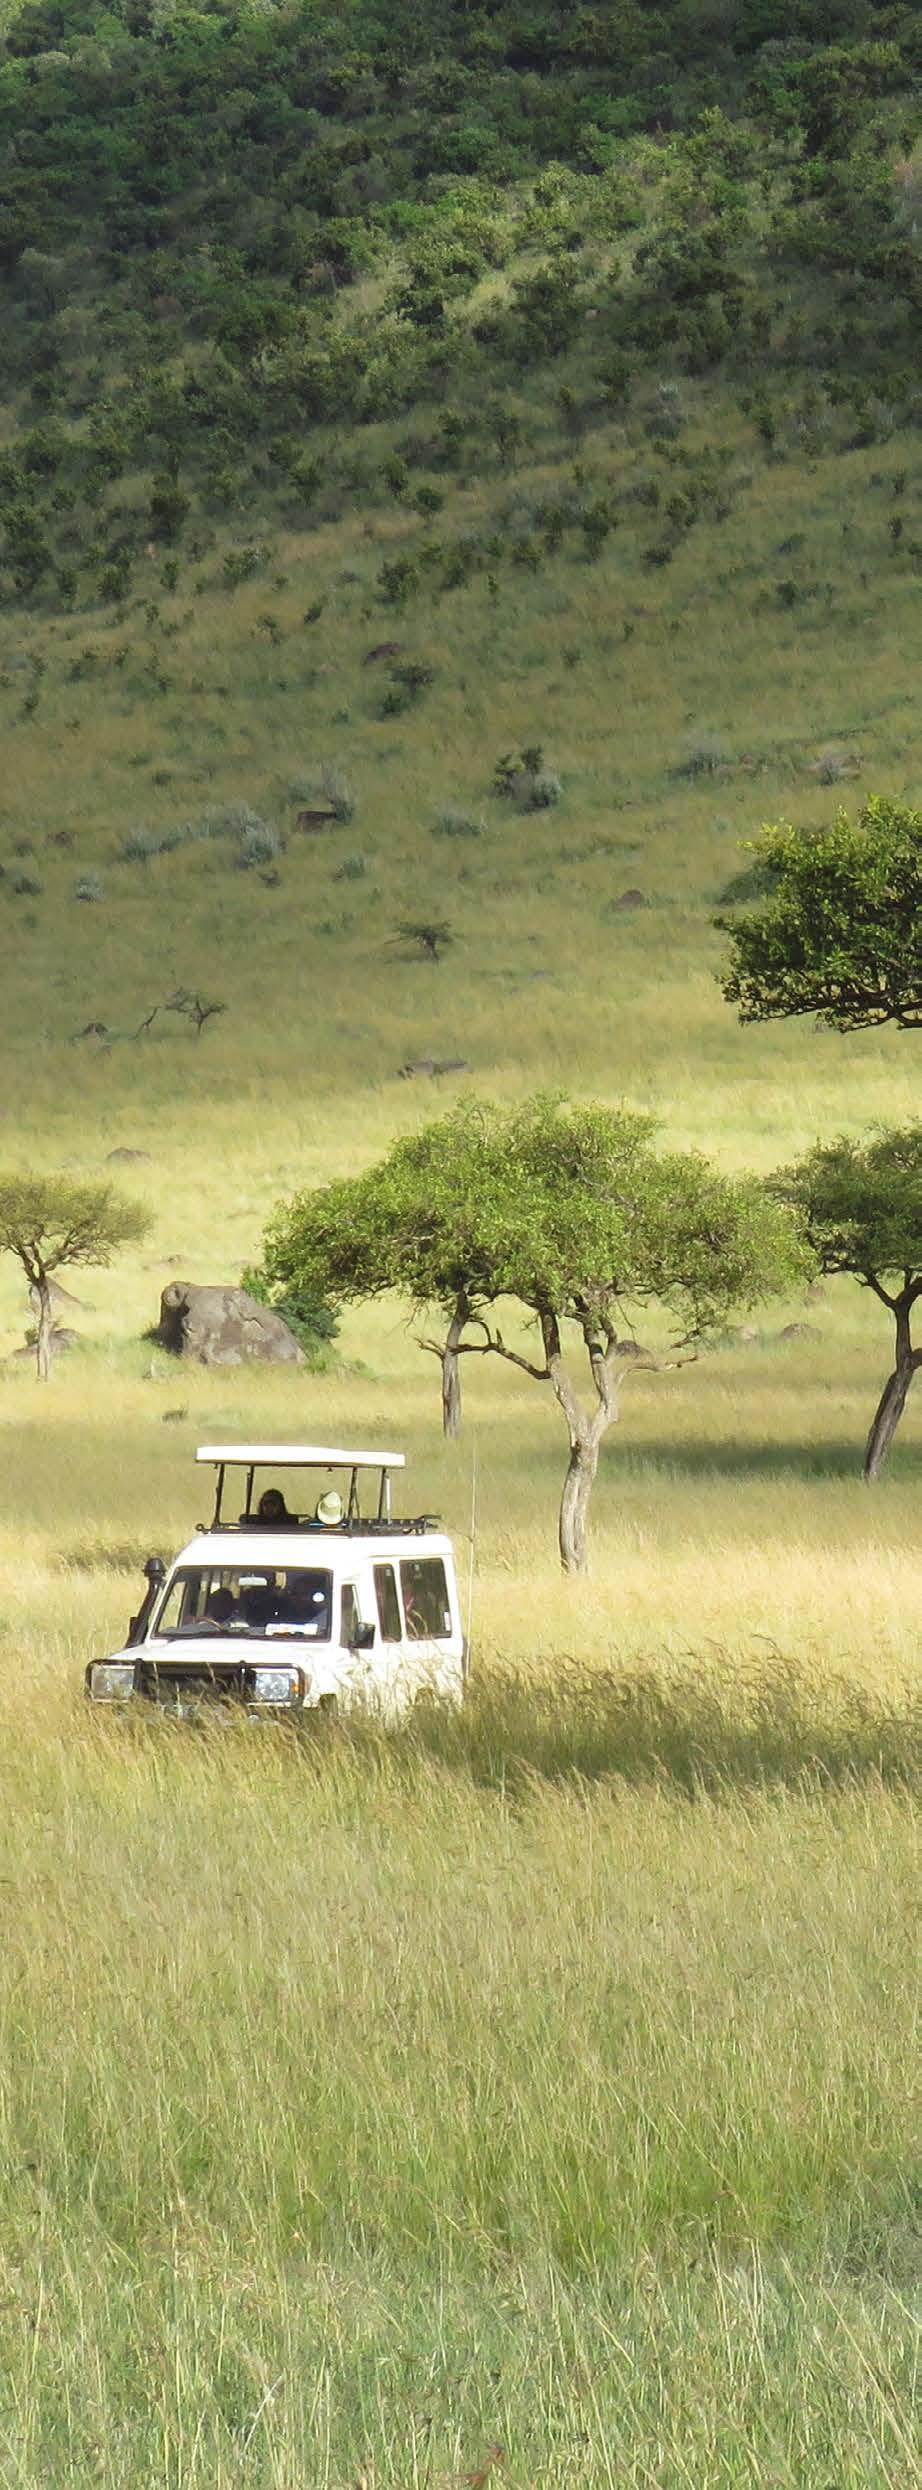 THE WILDLIFE SAFARI STORY WILDLIFE SAFARI is one of East Africa s most experienced and respected safari companies.